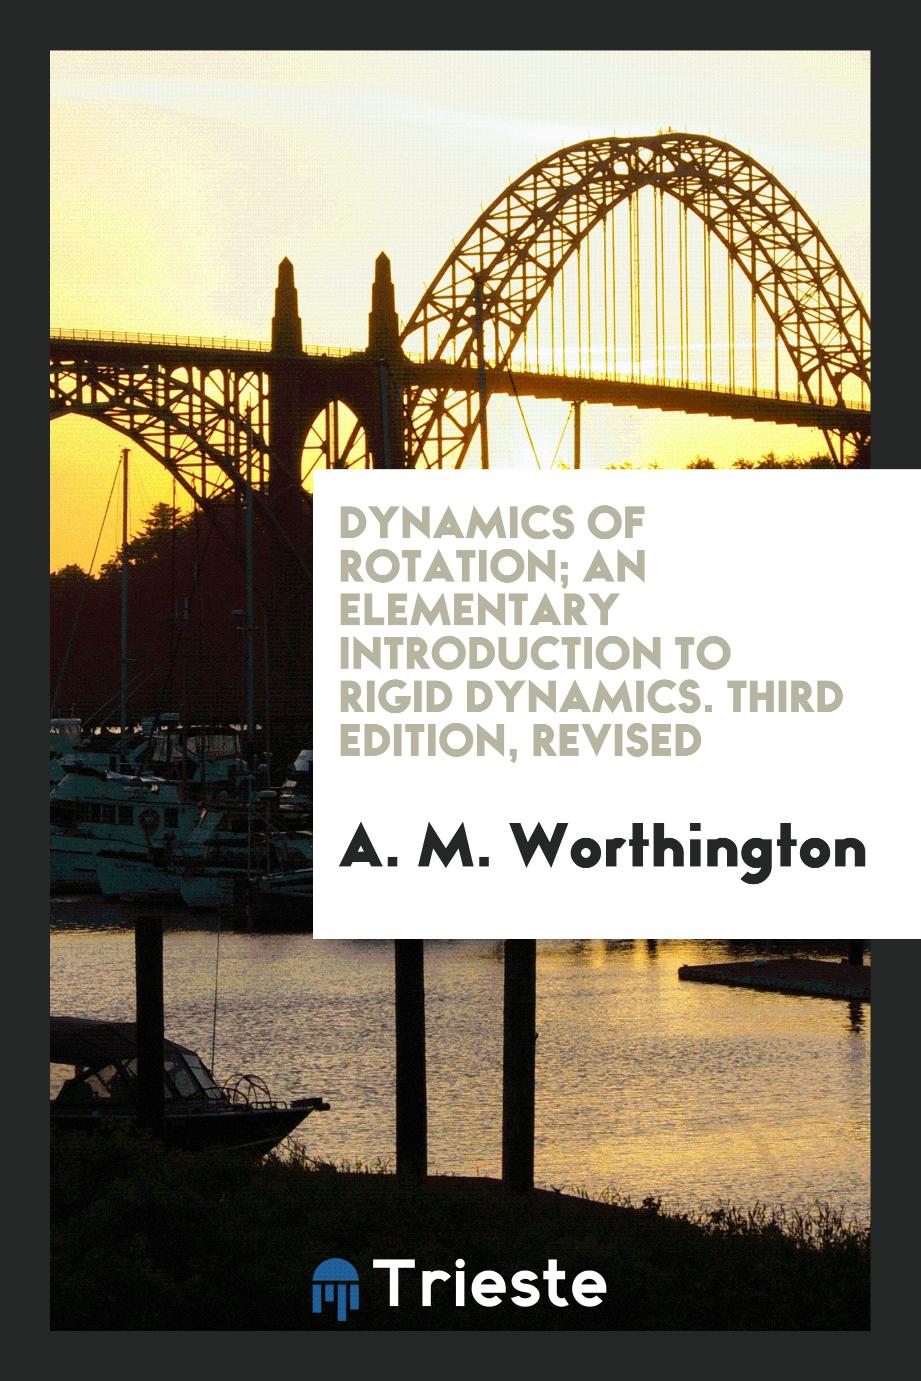 A. M. Worthington - Dynamics of Rotation; An Elementary Introduction to Rigid Dynamics. Third Edition, Revised